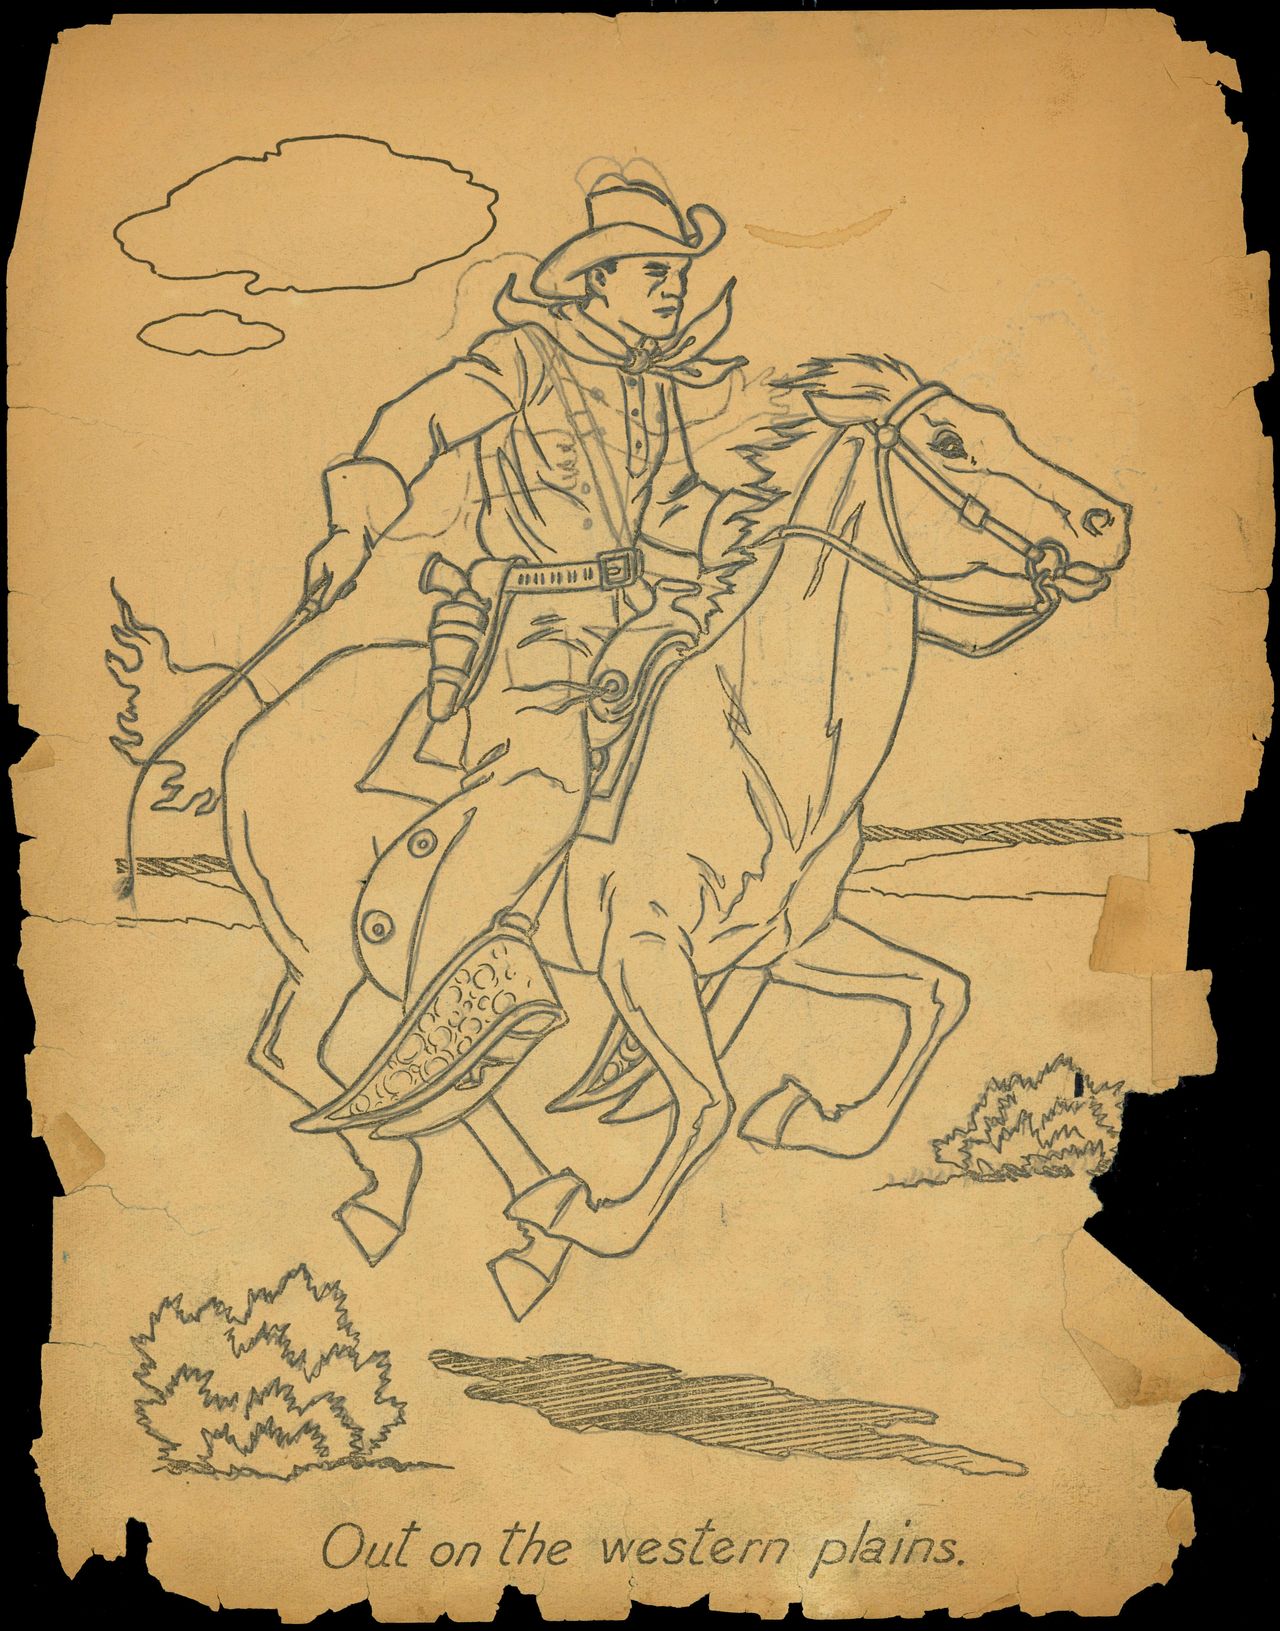 Untitled coloring book clipping ("Out on the Western Plains").